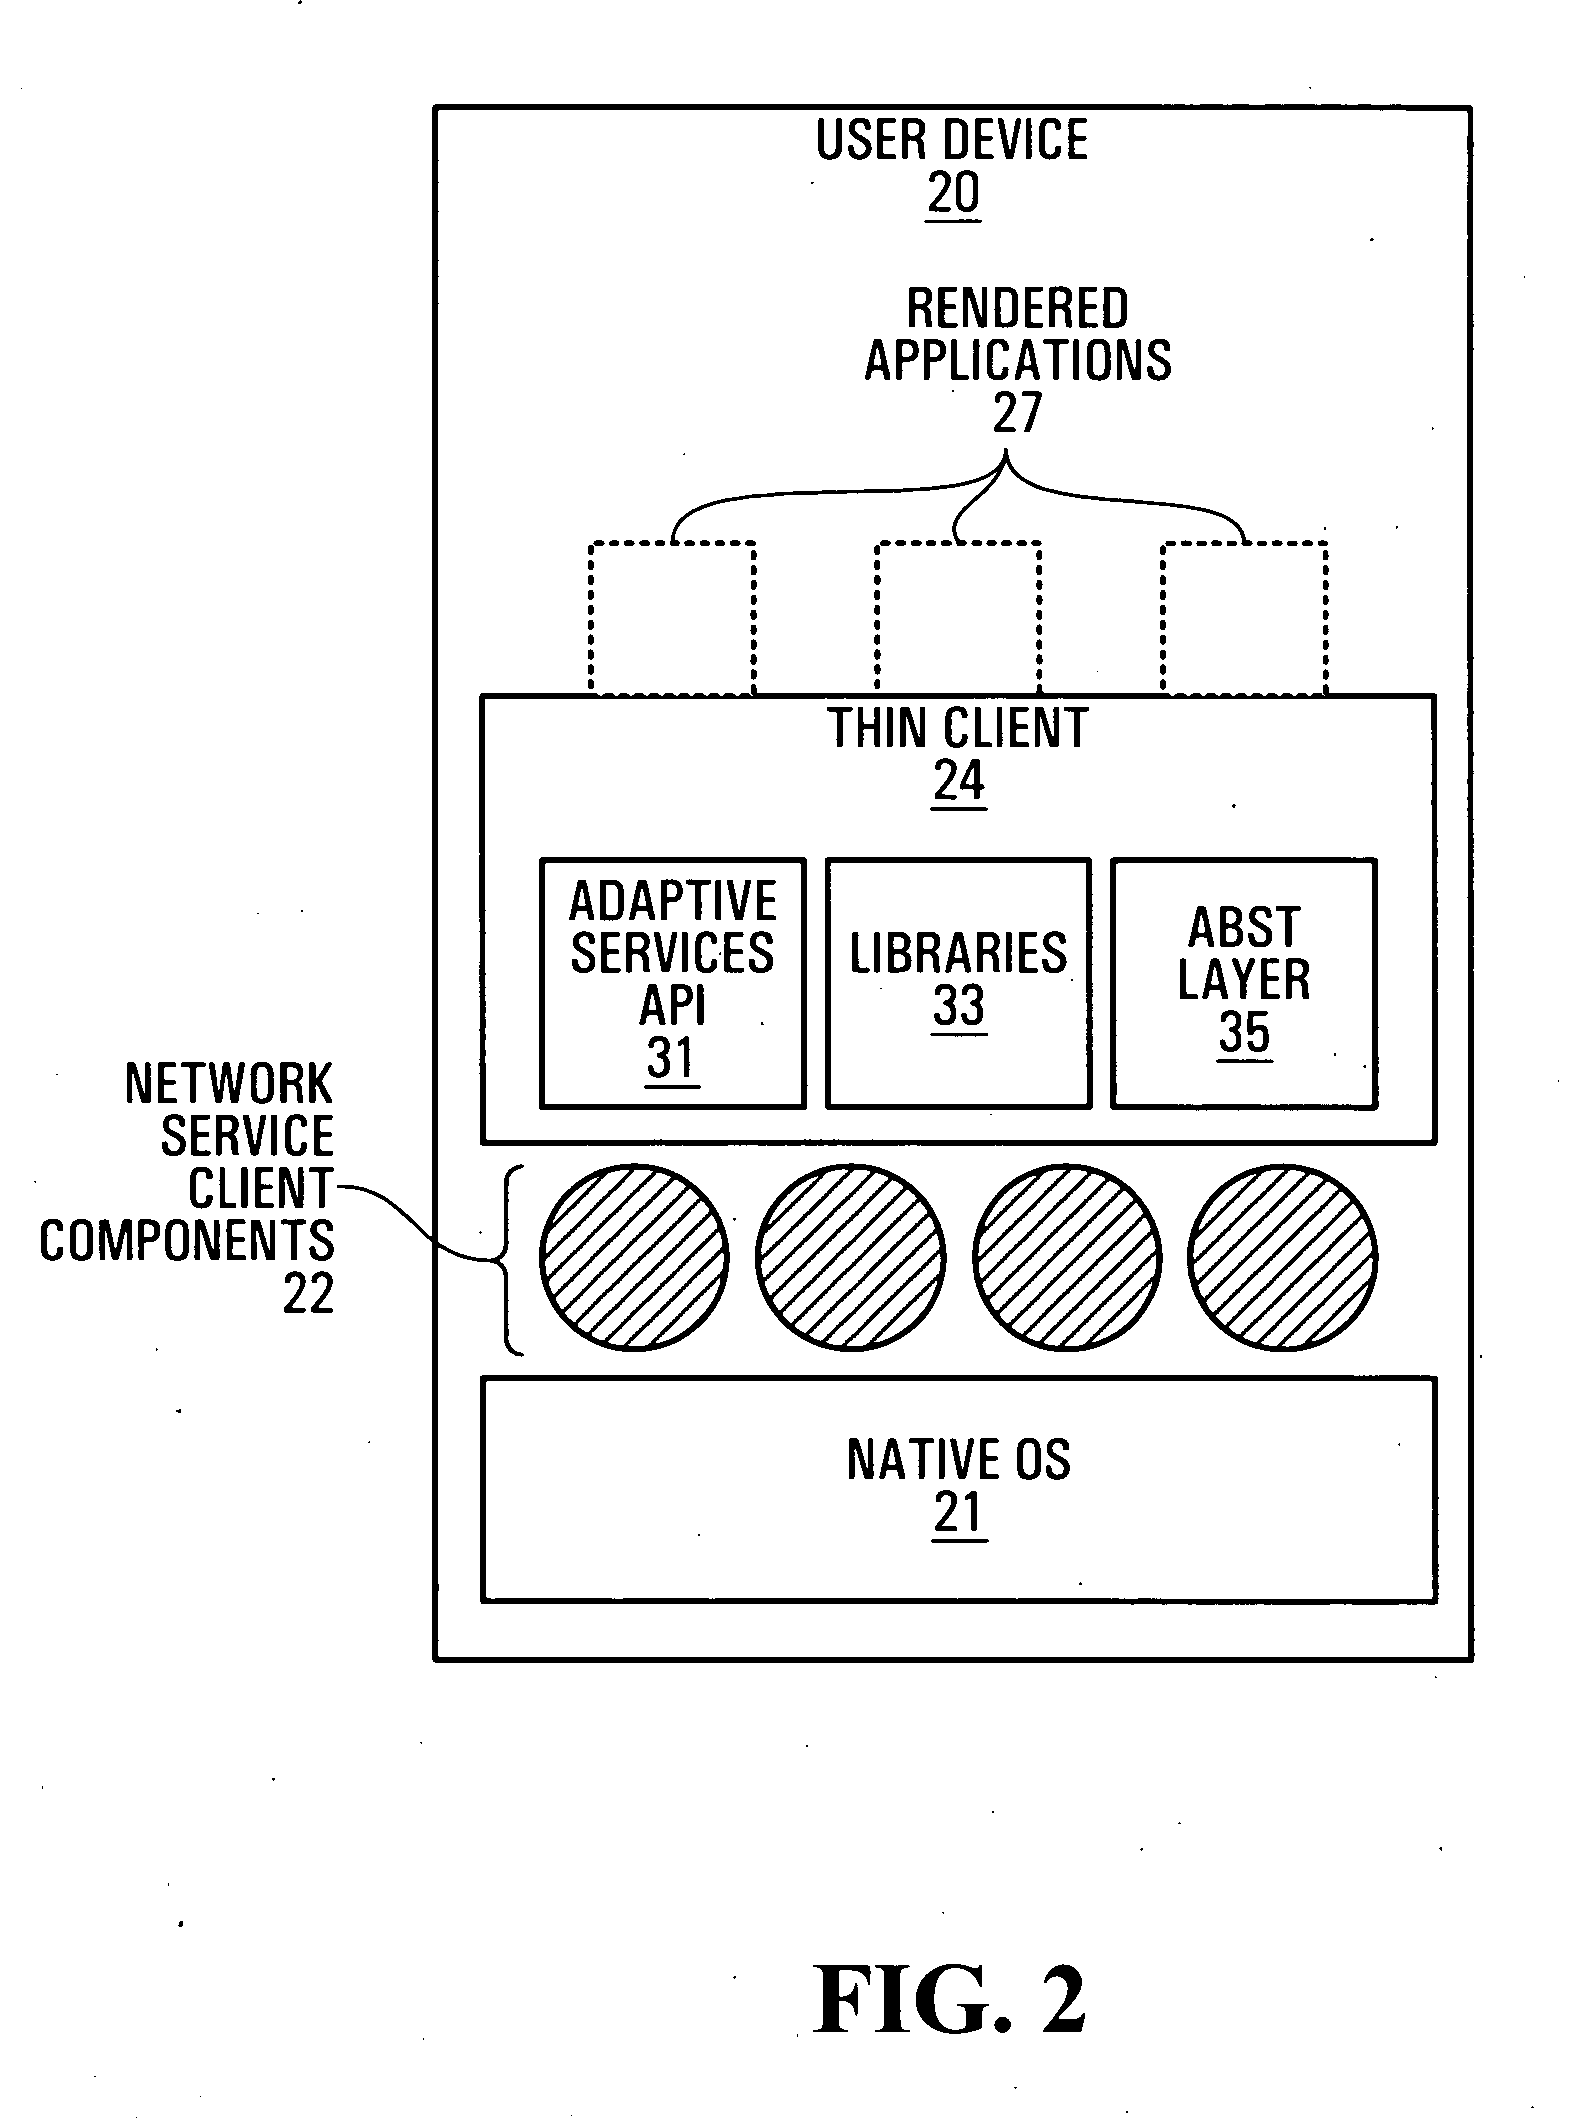 Method and apparatus for dynamic rendering of services